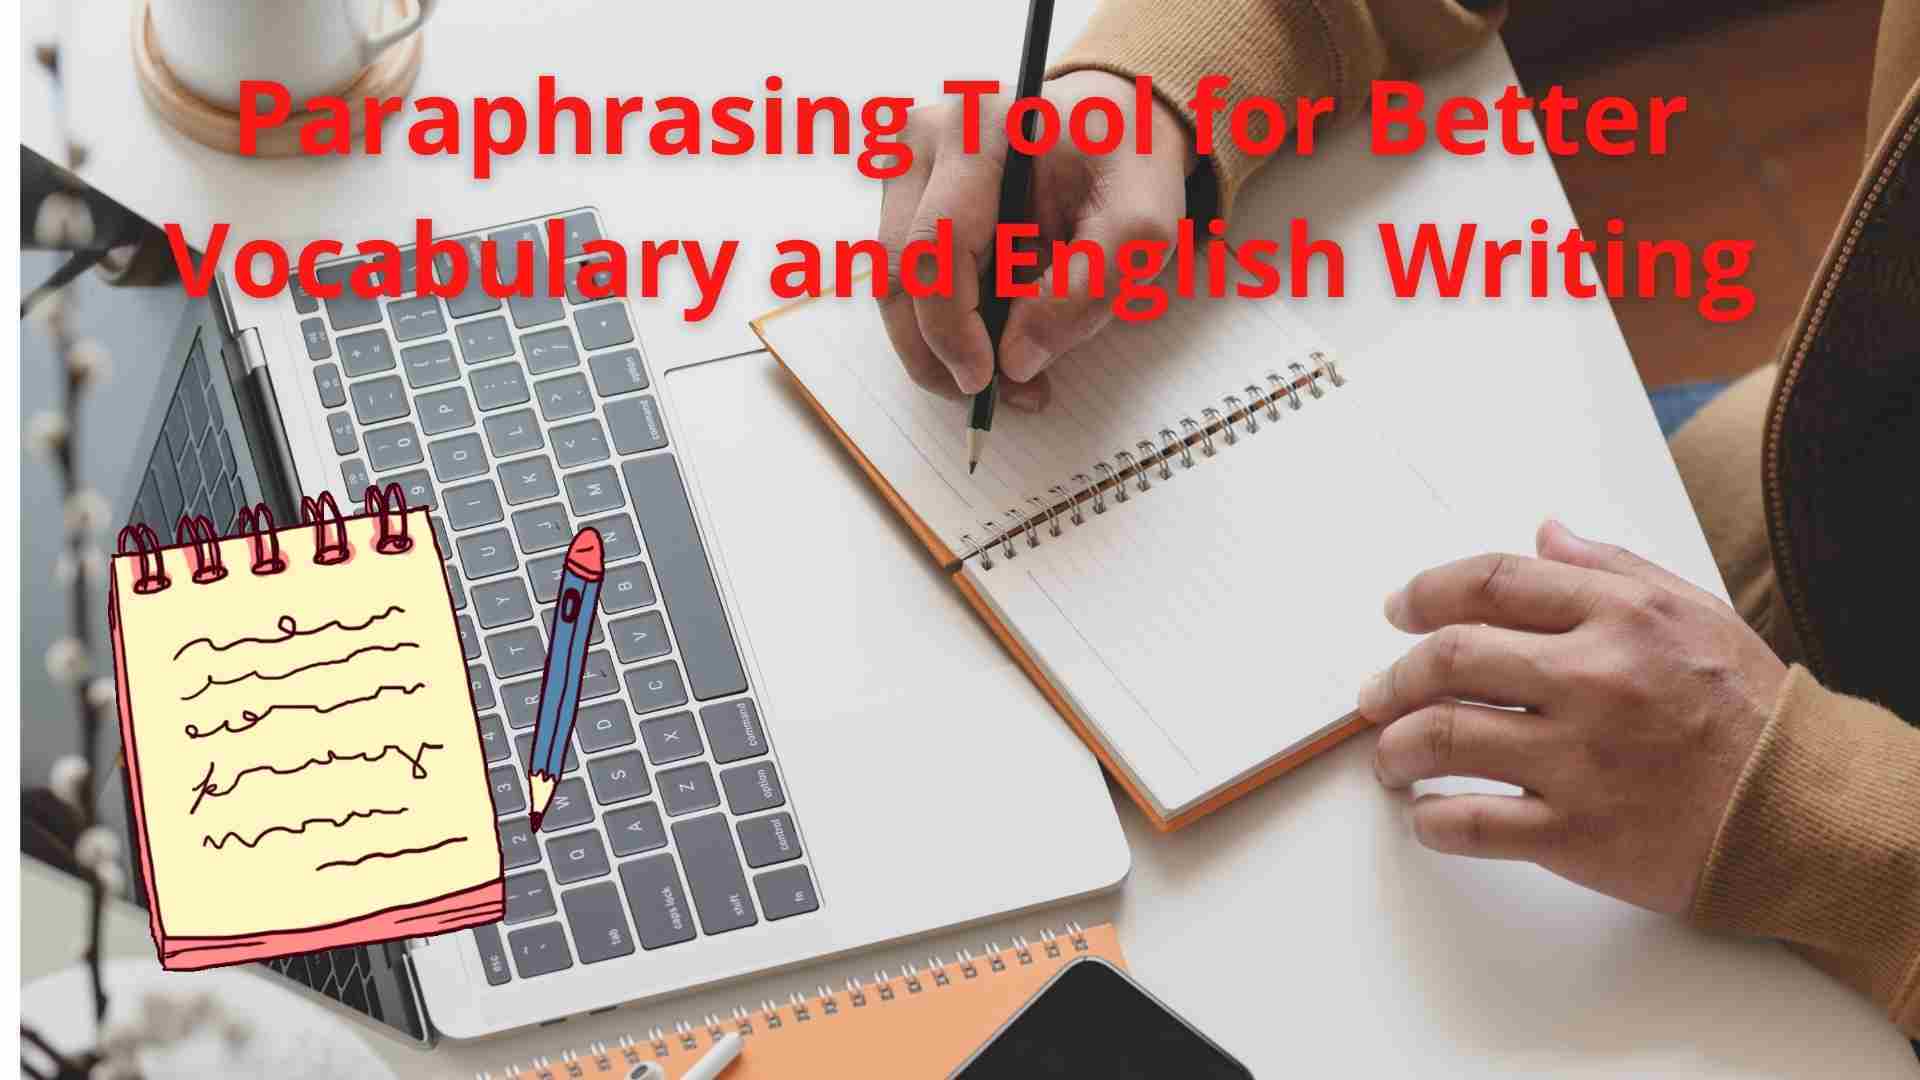 for article writers, the on-line Paraphrasing Tool for Improved Vocabulary and English Writing